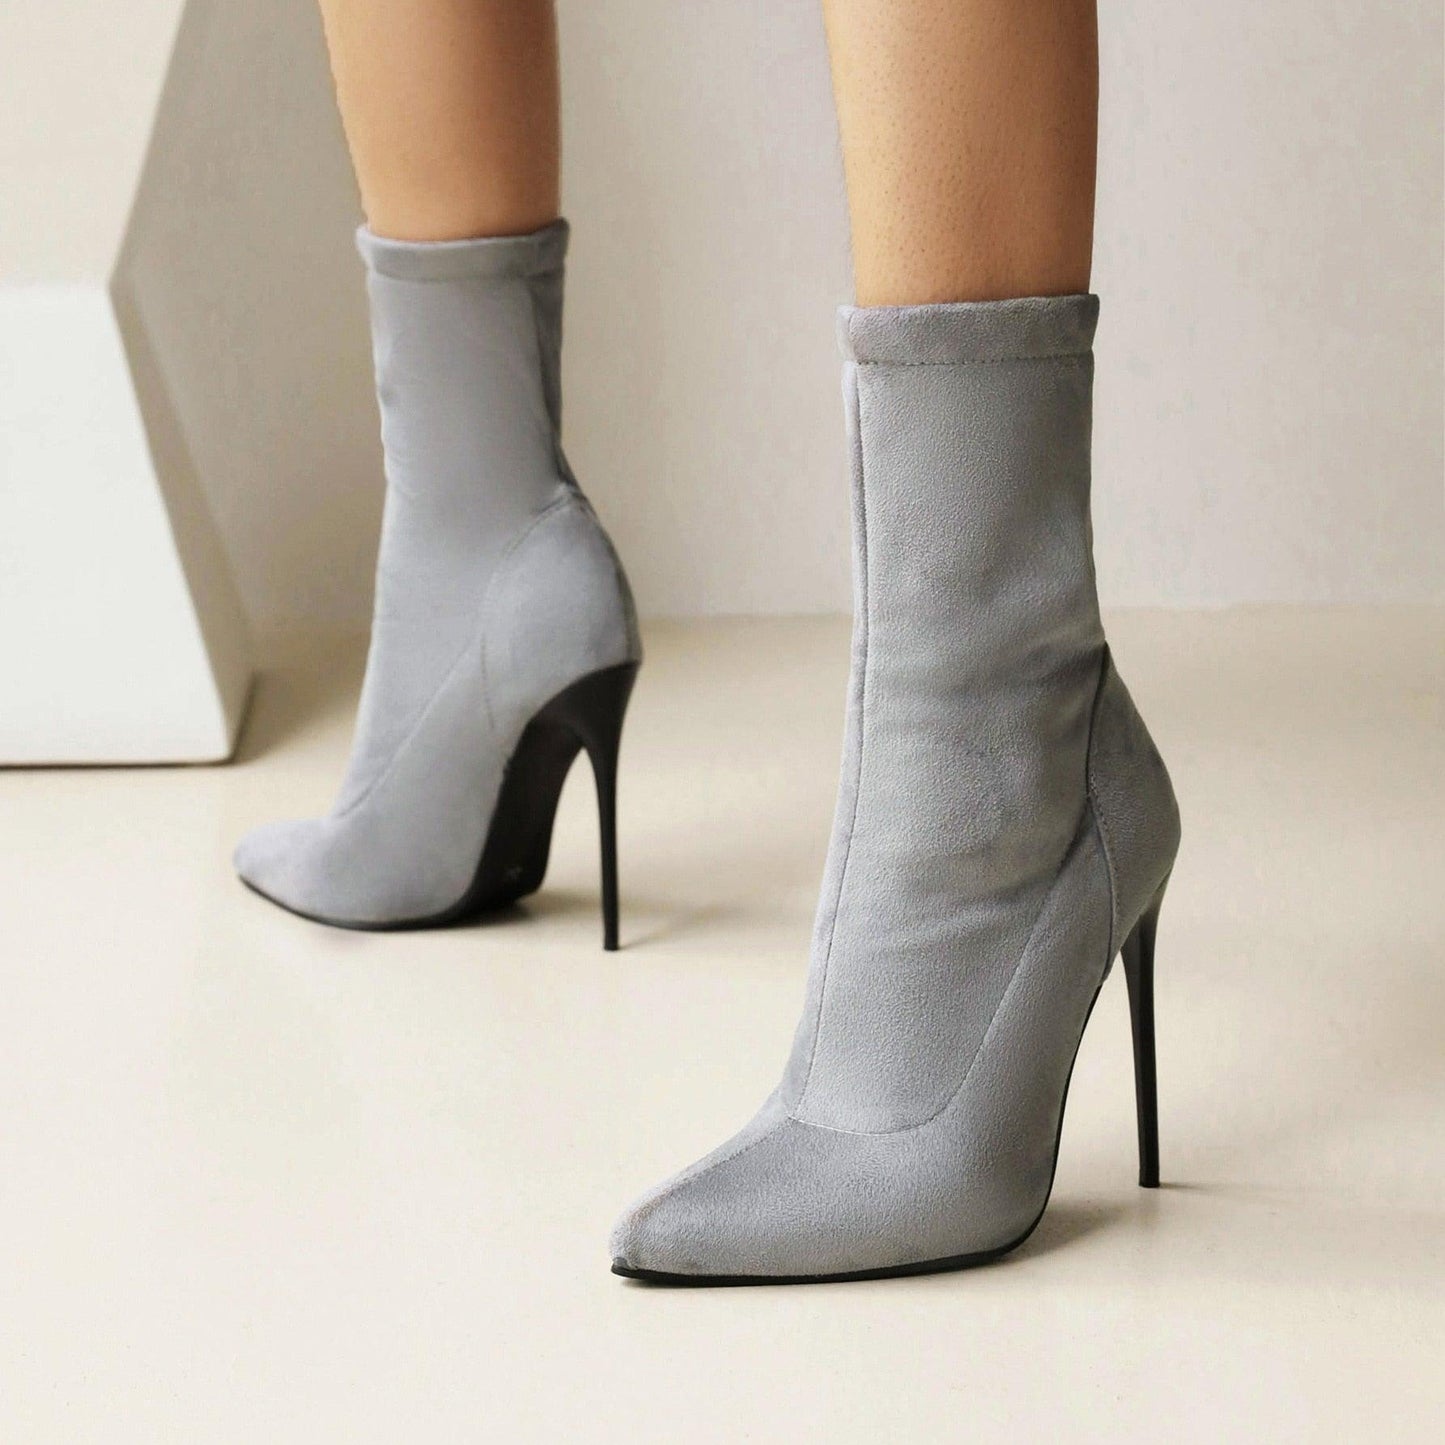 12 cm High Heel Ankle Boots - Your Shiny Clothes